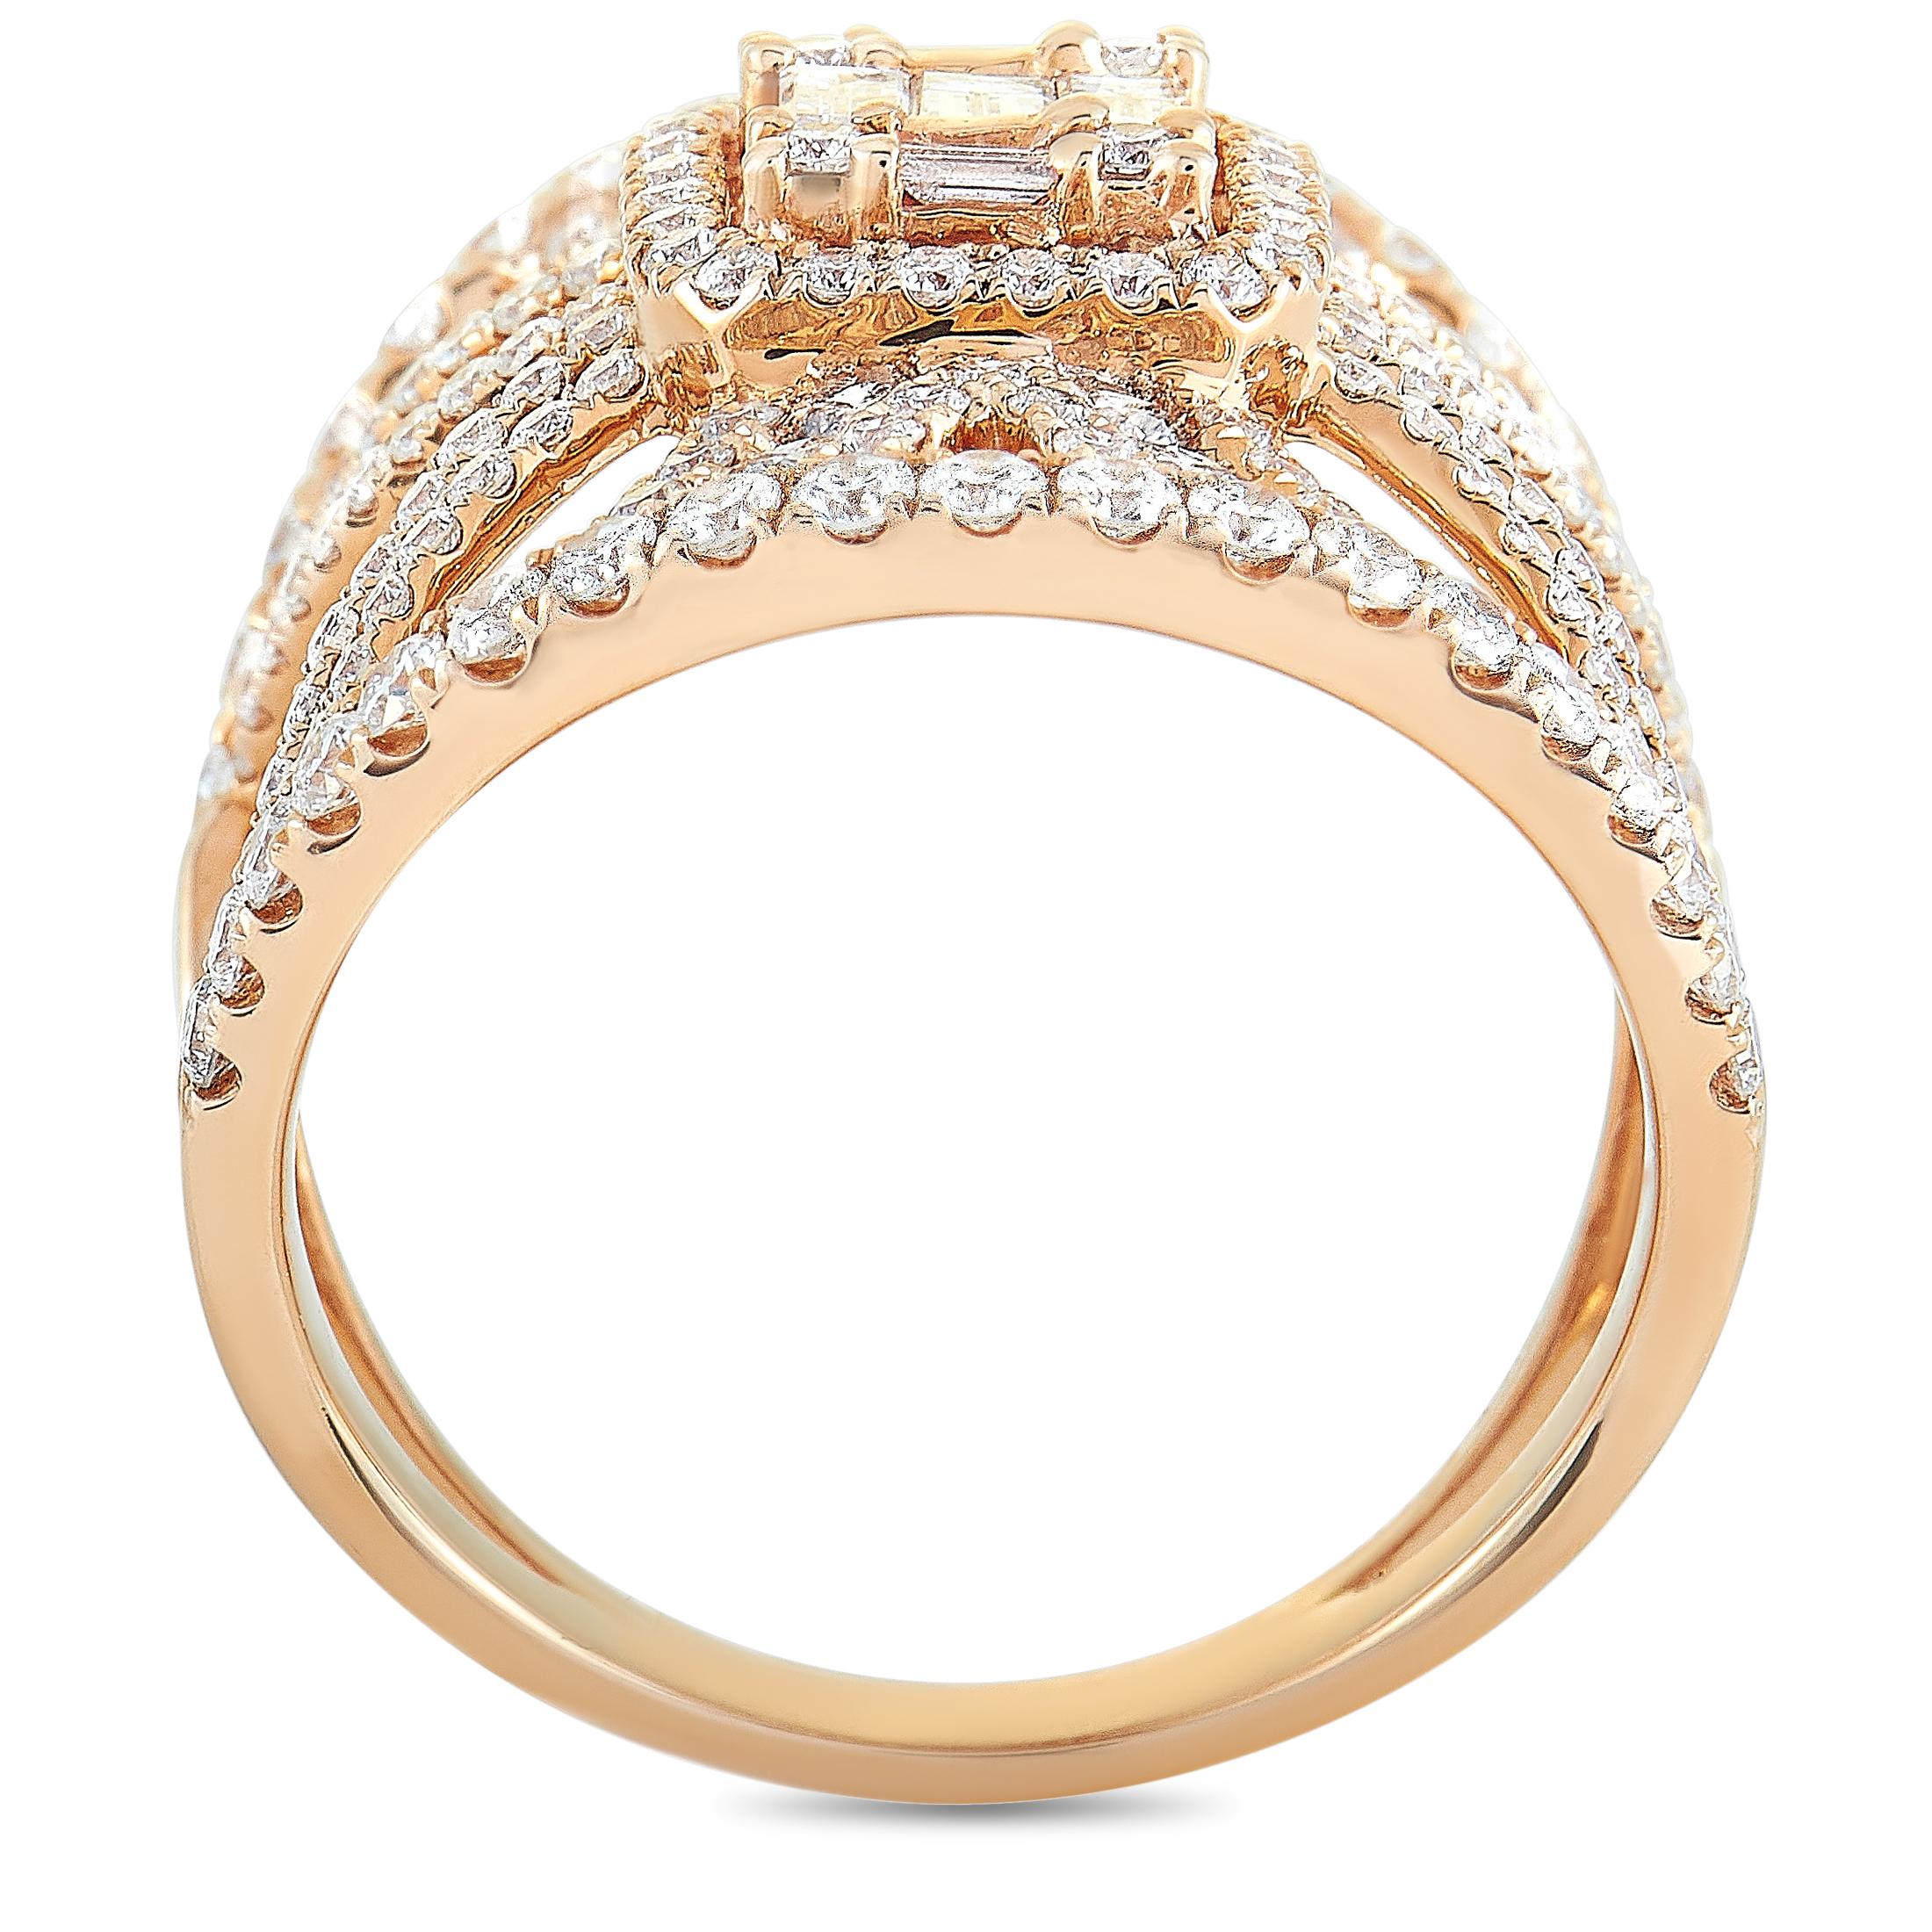 This LB Exclusive ring is crafted from 18K rose gold and set with round and baguette diamonds that total 1.70 and 0.25 carats respectively. The ring weighs 7.8 grams, boasting band thickness of 3 mm and top height of 4 mm, while top dimensions